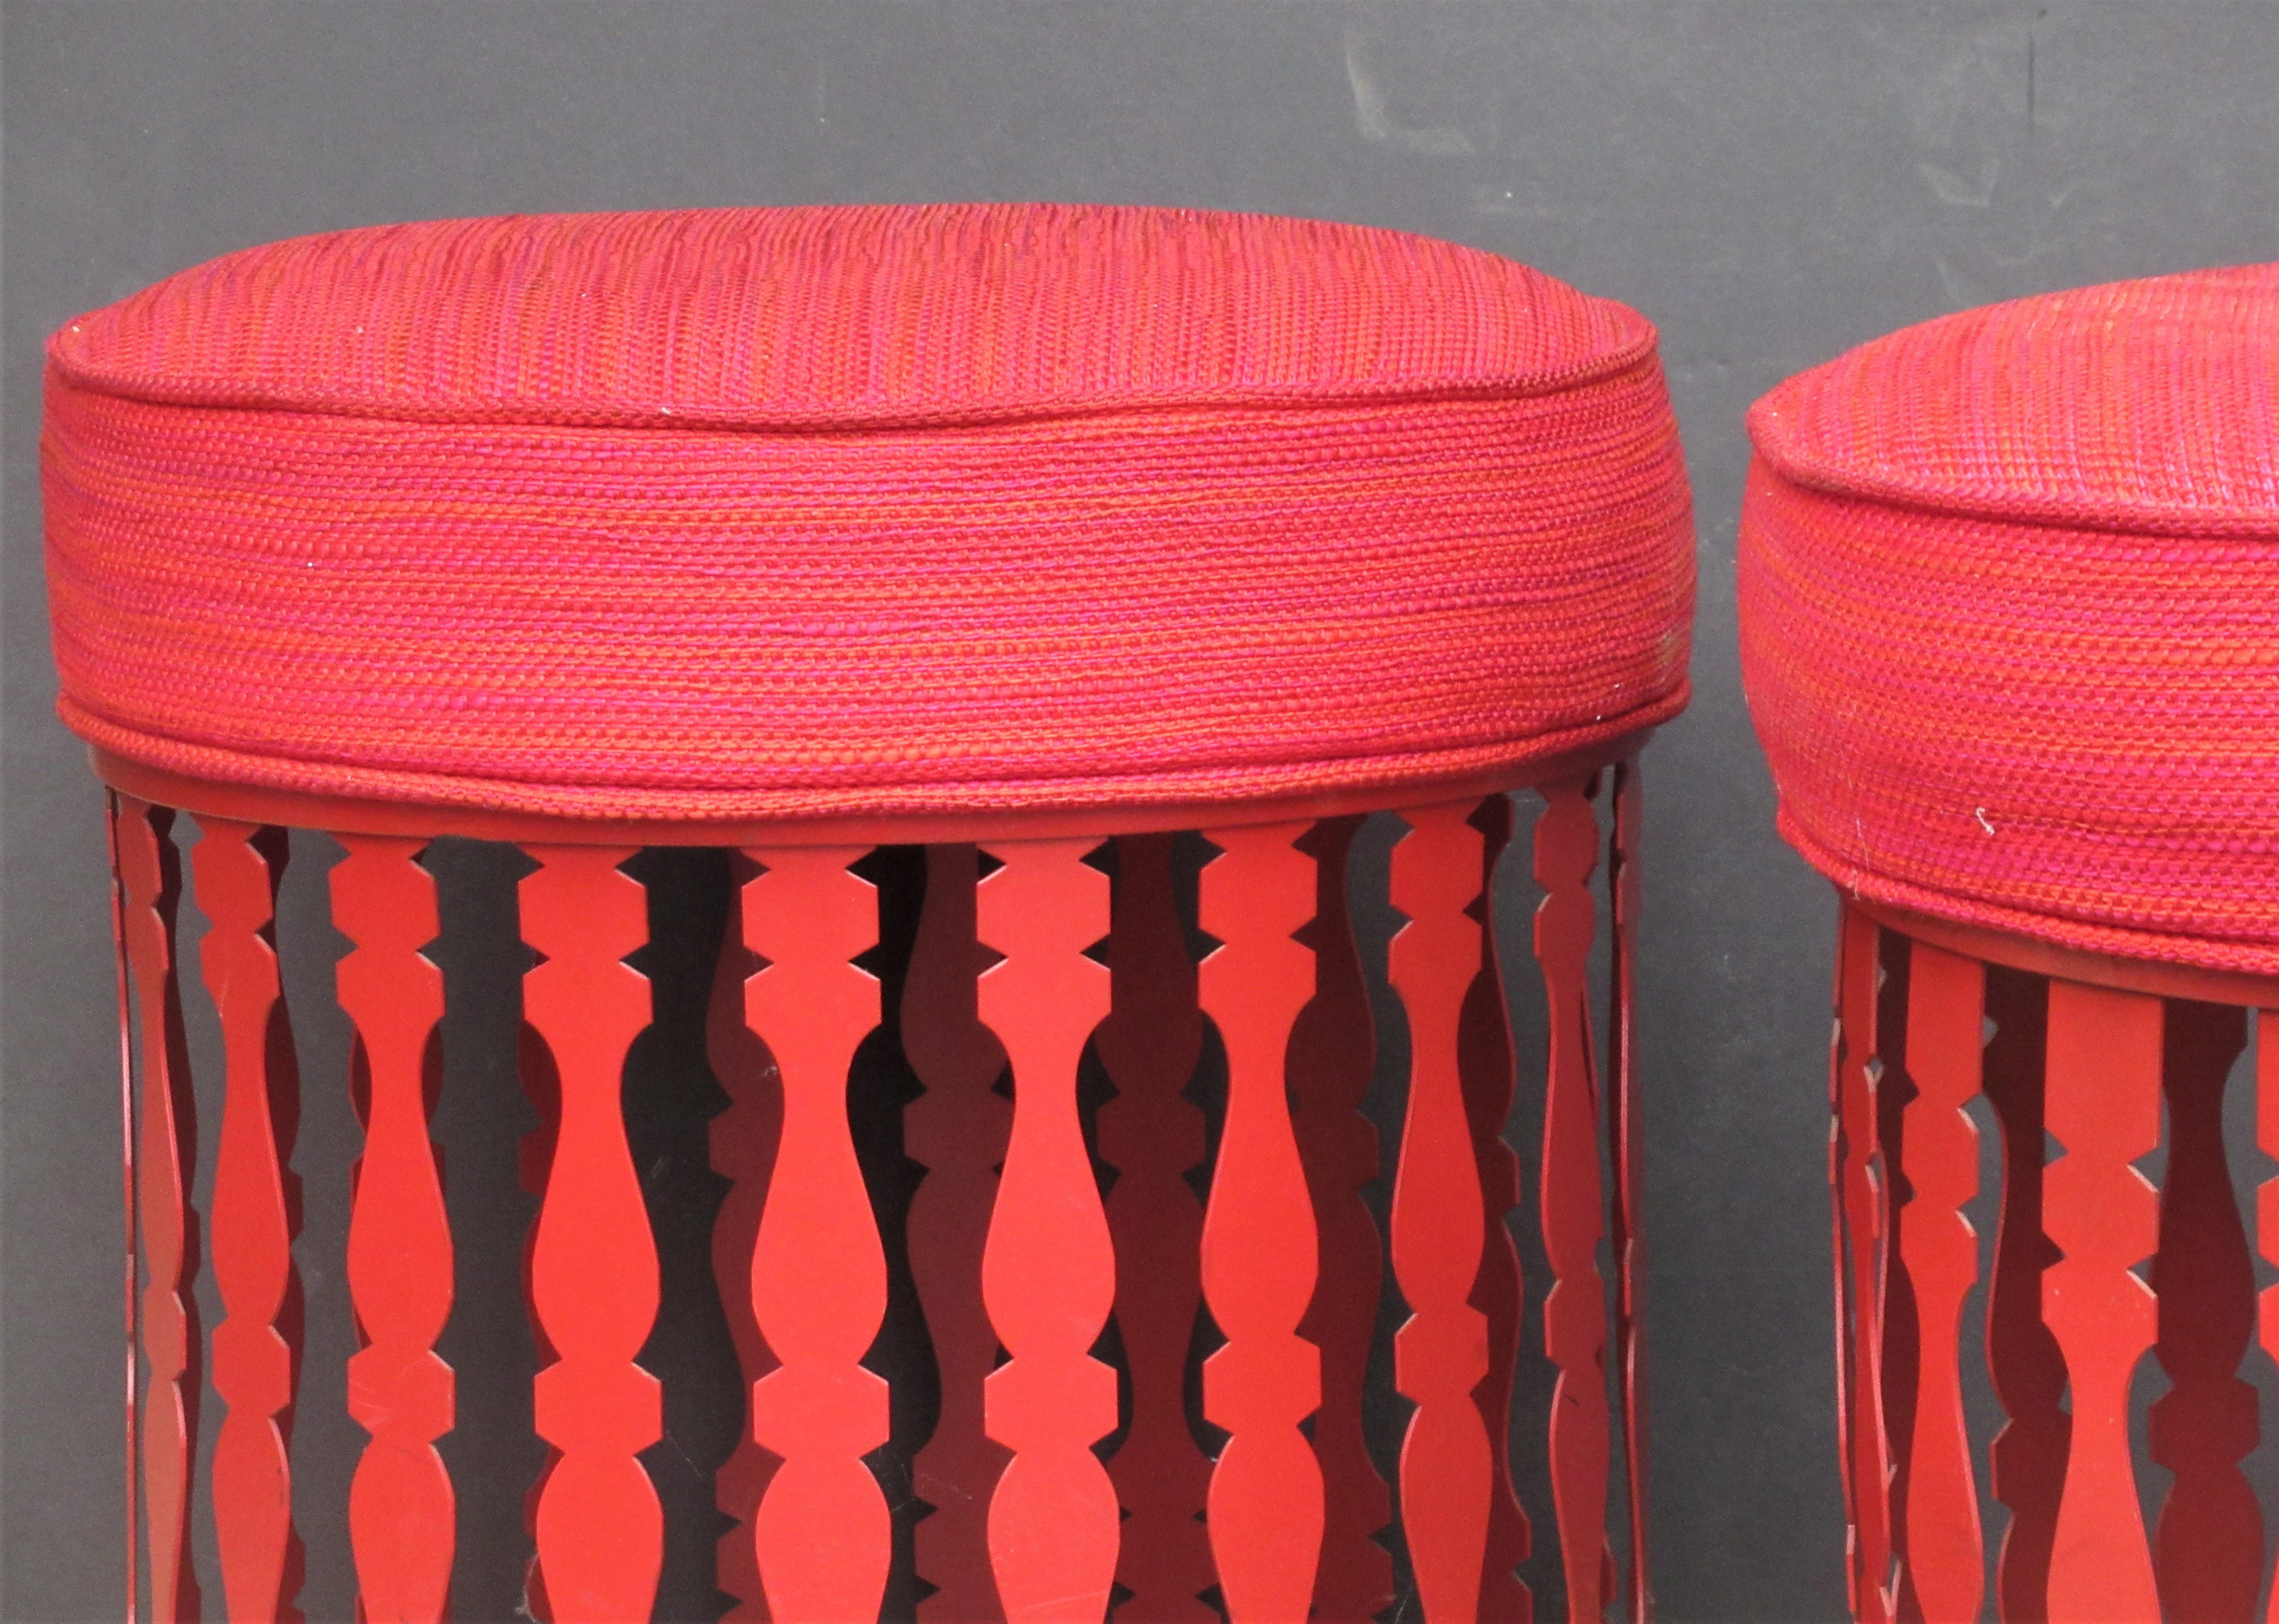 Matching pair of round decorative iron ottomans poufs sitting stools by Arthur Umanoff for Shaver Howard in all original beautiful glowing Chinese red enamel painted surface. The original complimenting colorful textured seat upholstery is very